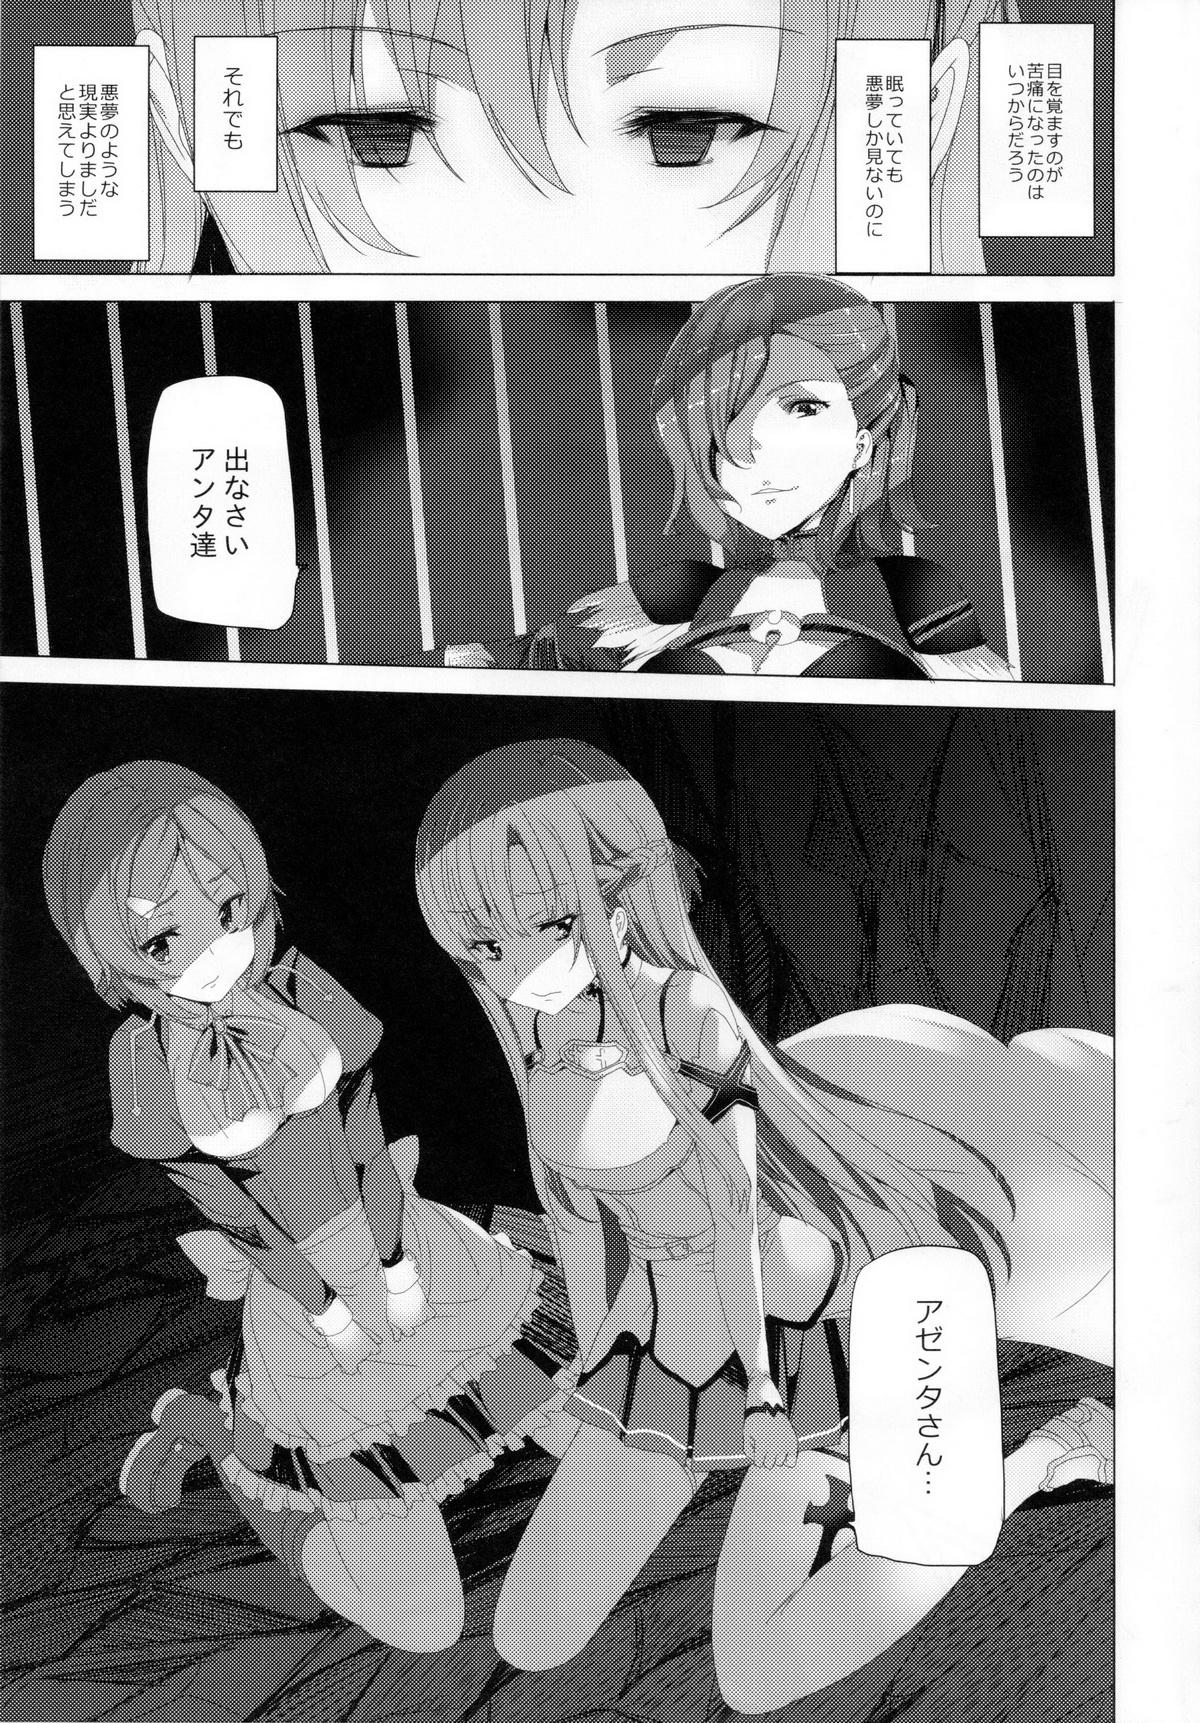 Amature Sex WRONG WORLD - Sword art online Chunky - Page 7